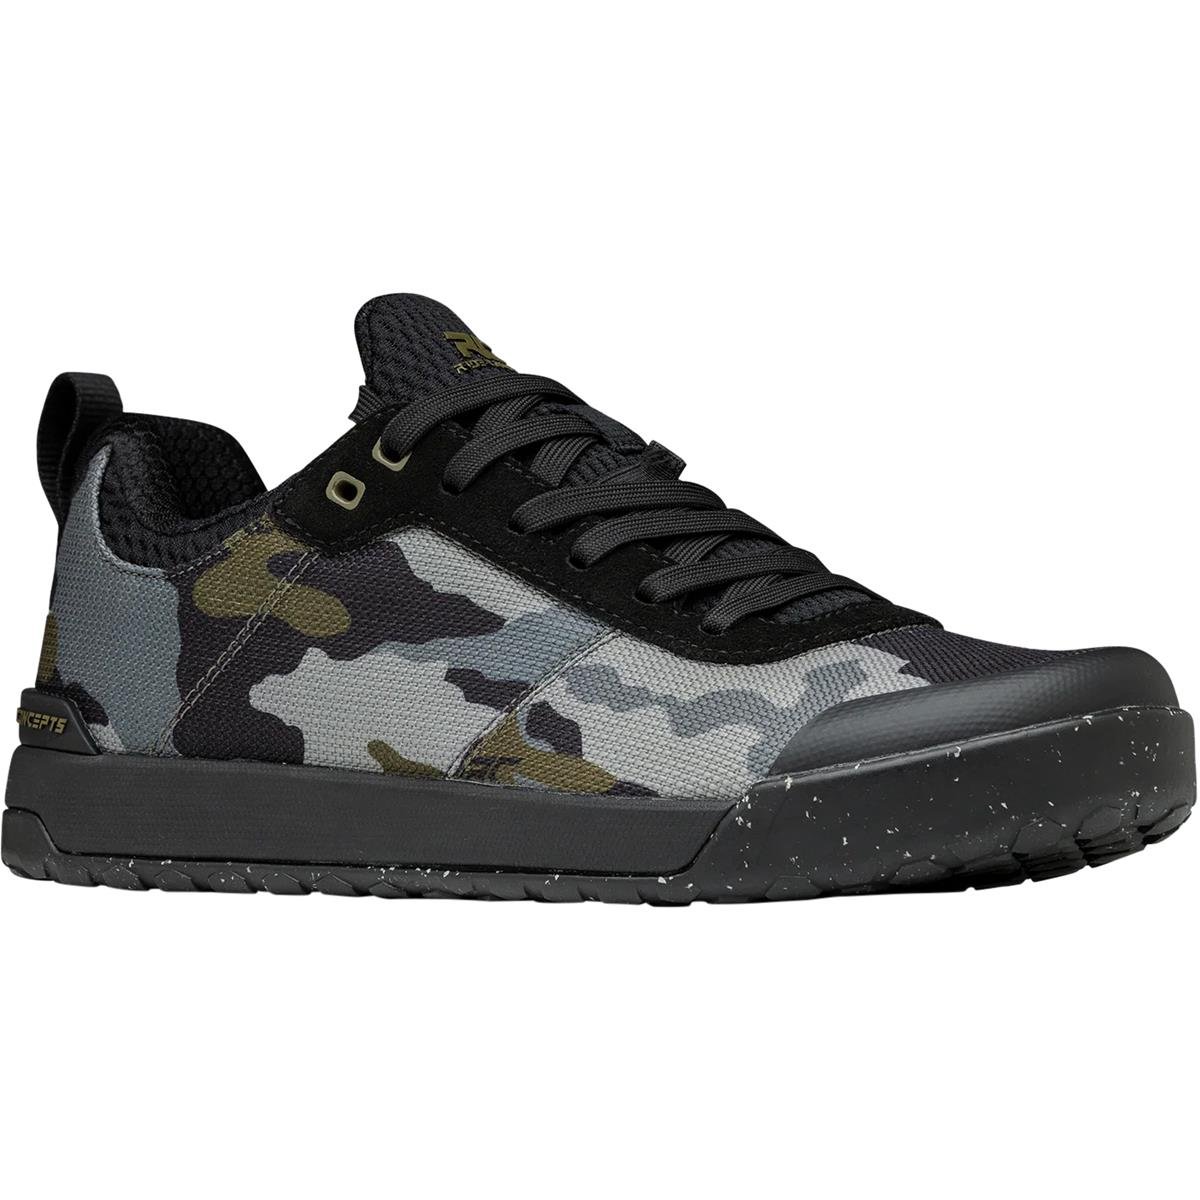 Ride Concepts MTB Shoes Accomplice Flat Olive Camo